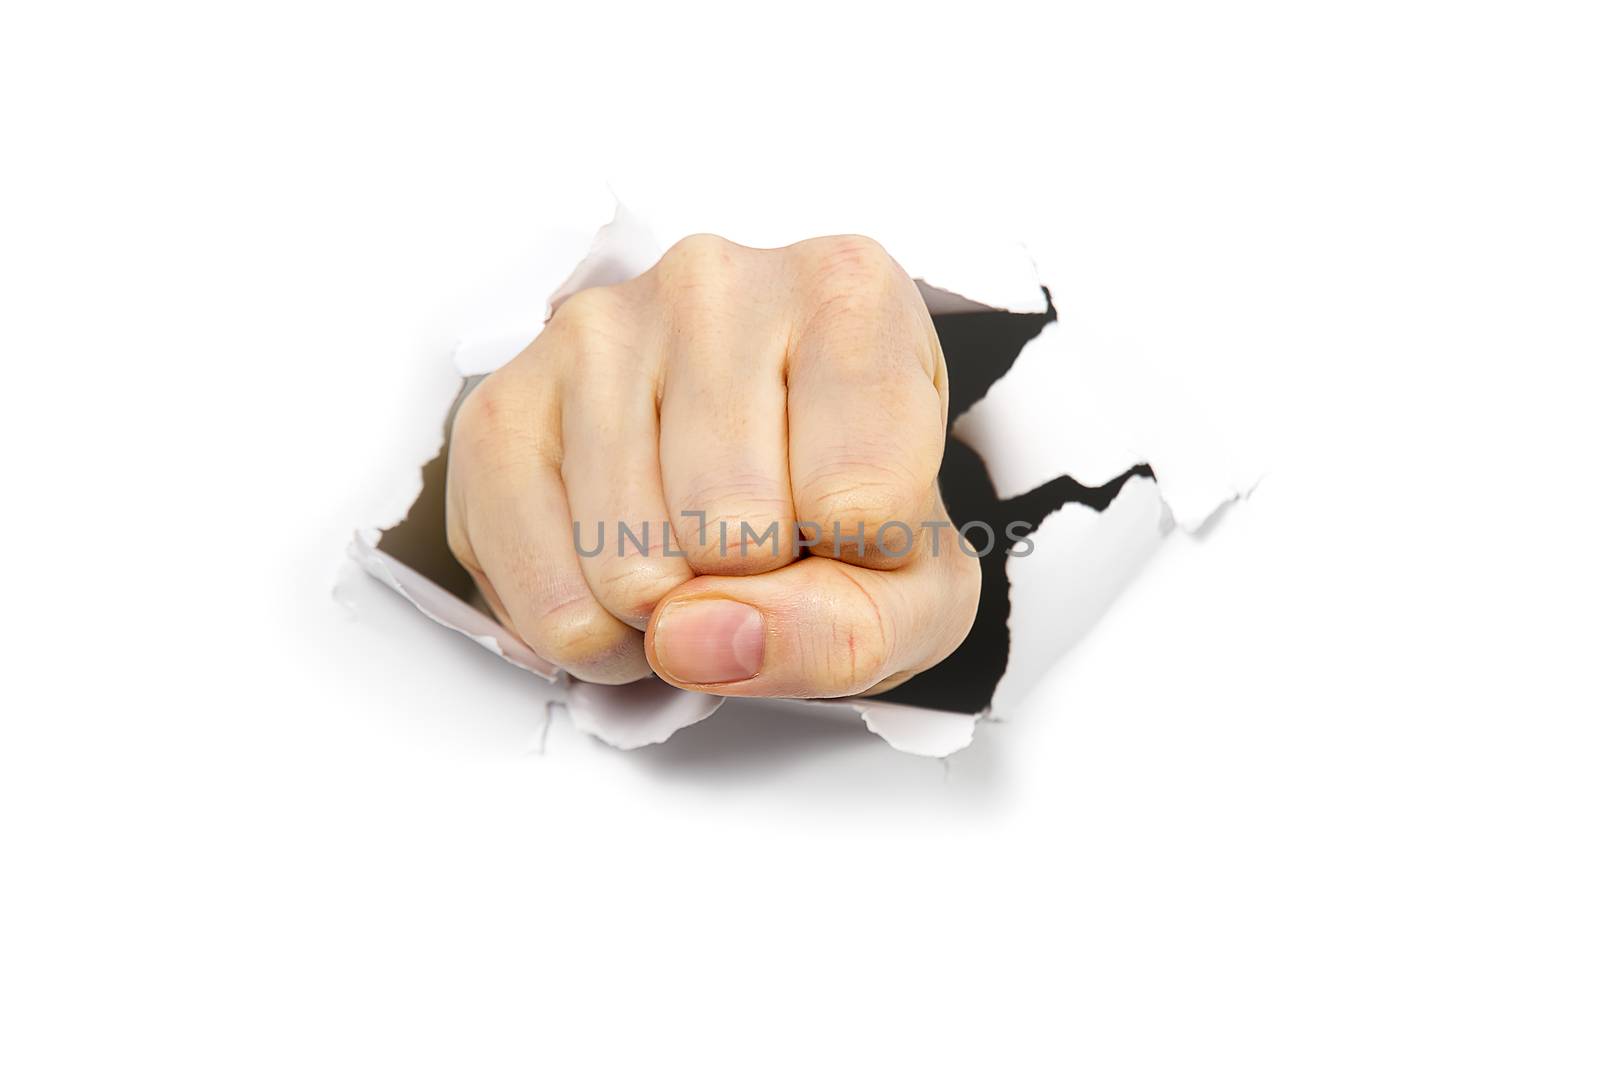 punching hole through paper wall with fist. Punch break through the paper wall. Fist coming out the paper hole isolated on white background.